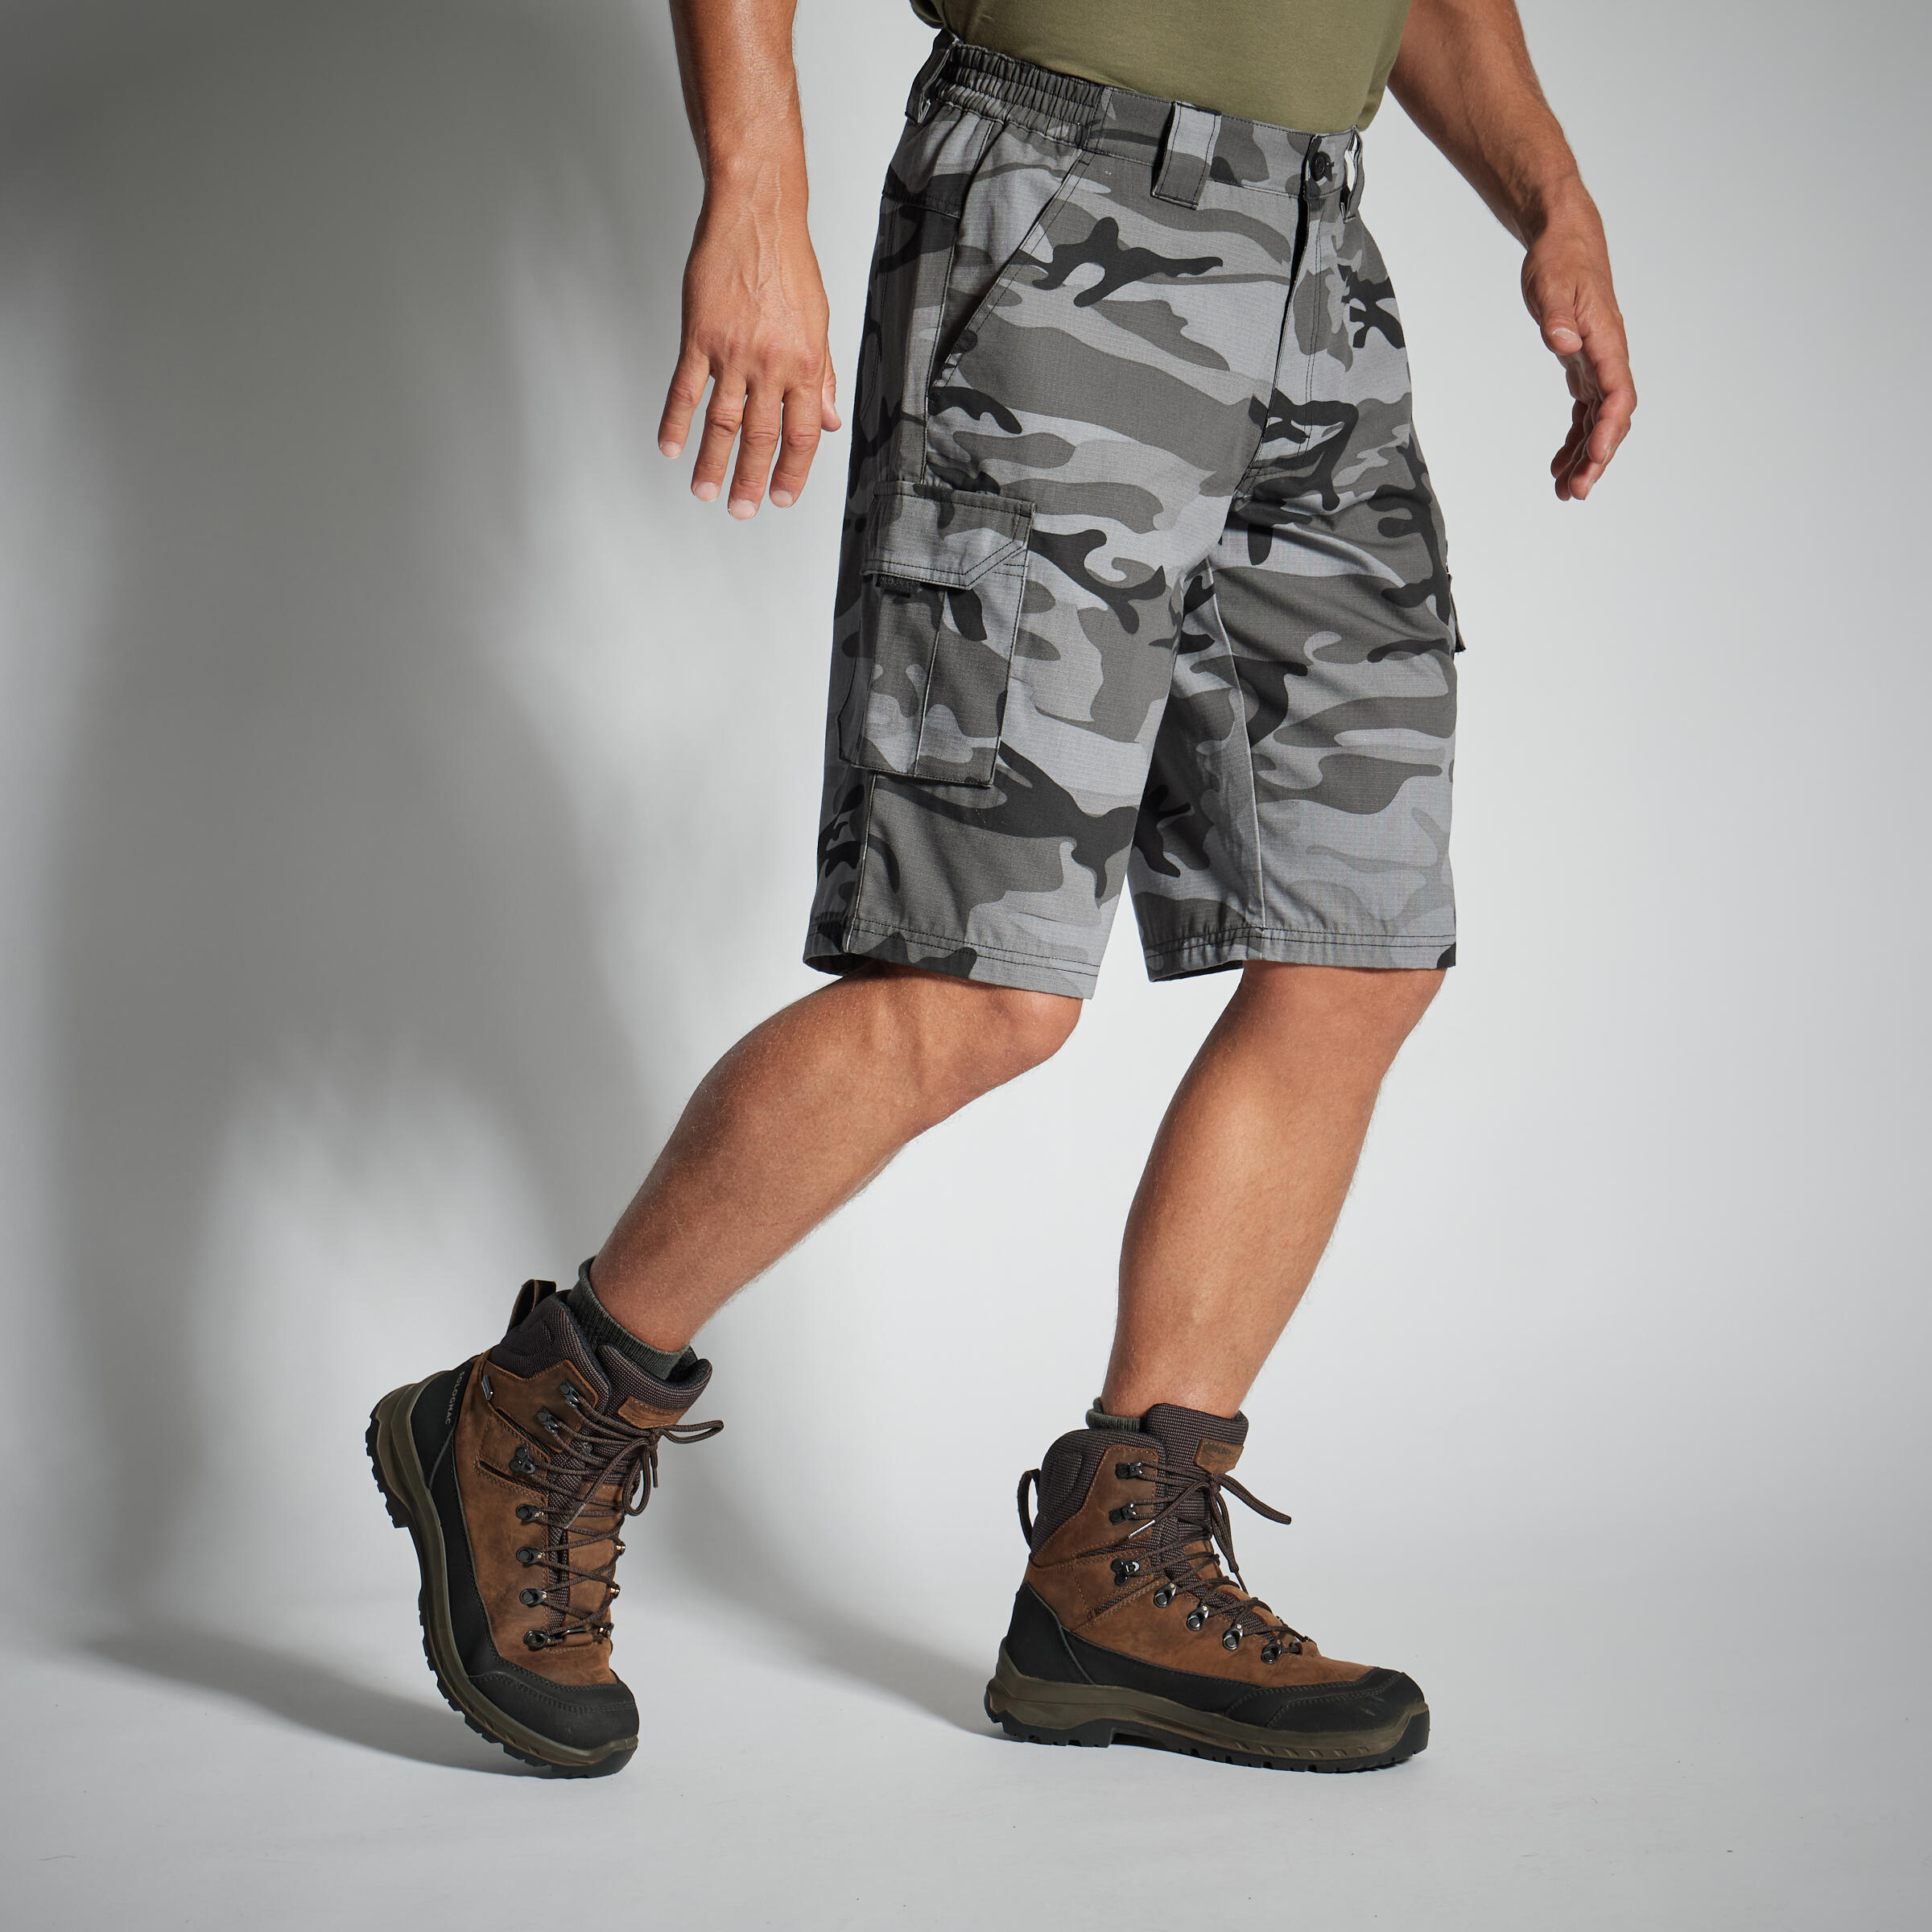 Camouflage Pants  Buy Camouflage Pants online at Best Prices in India   Flipkartcom